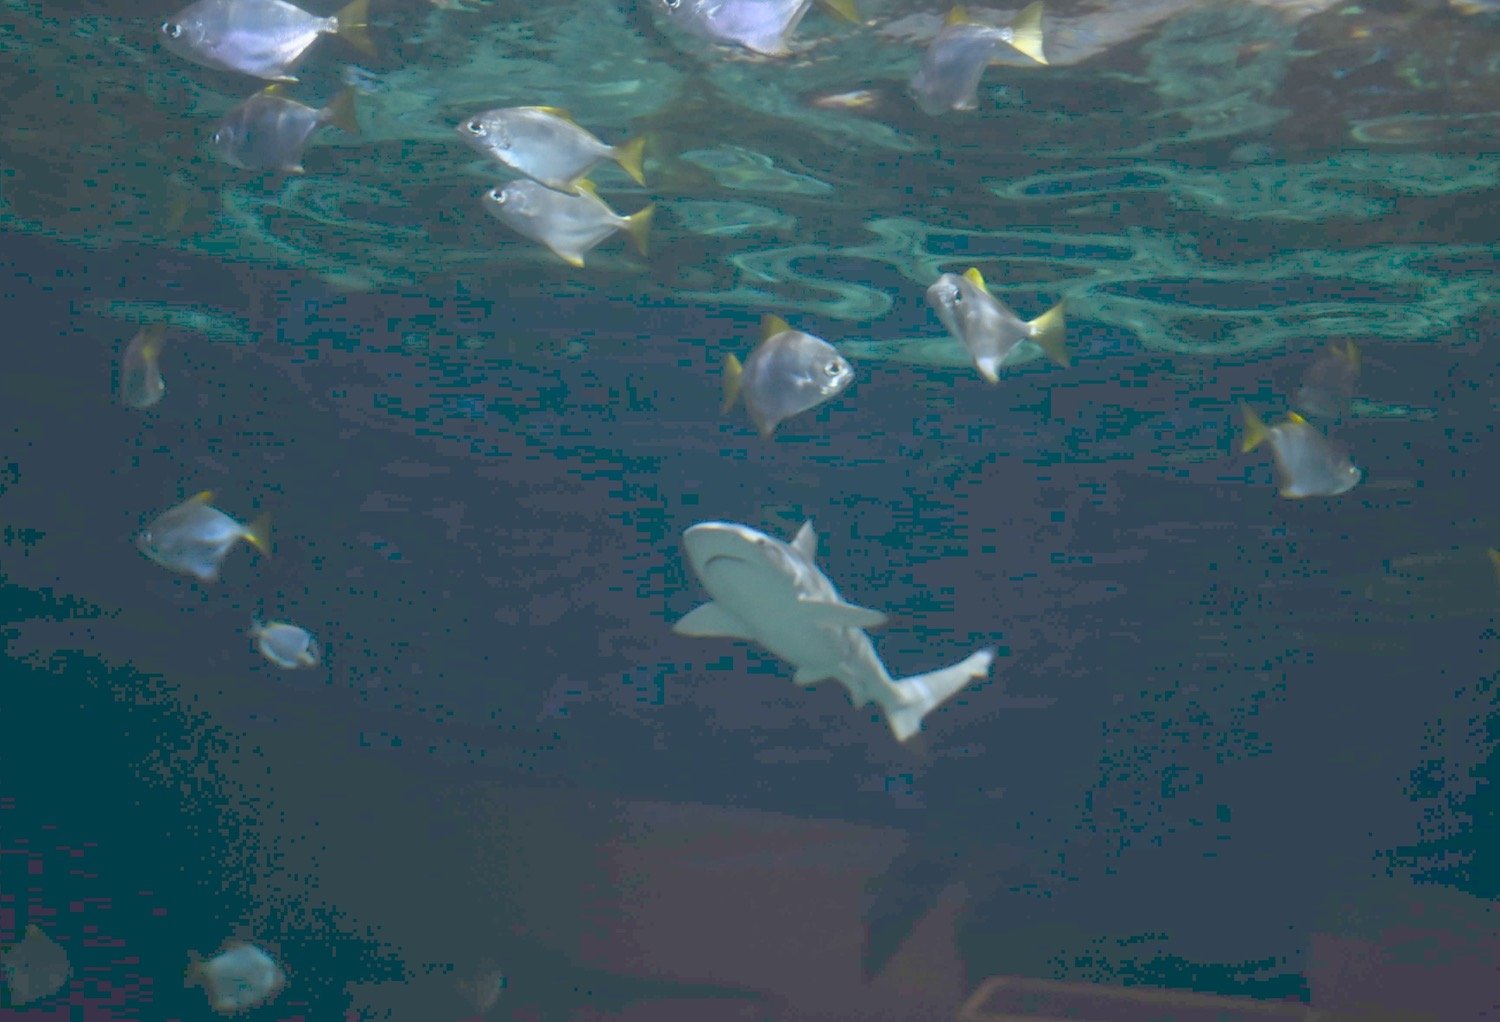 A small shark swims among smaller fish in an aquarium tank against a dark background.